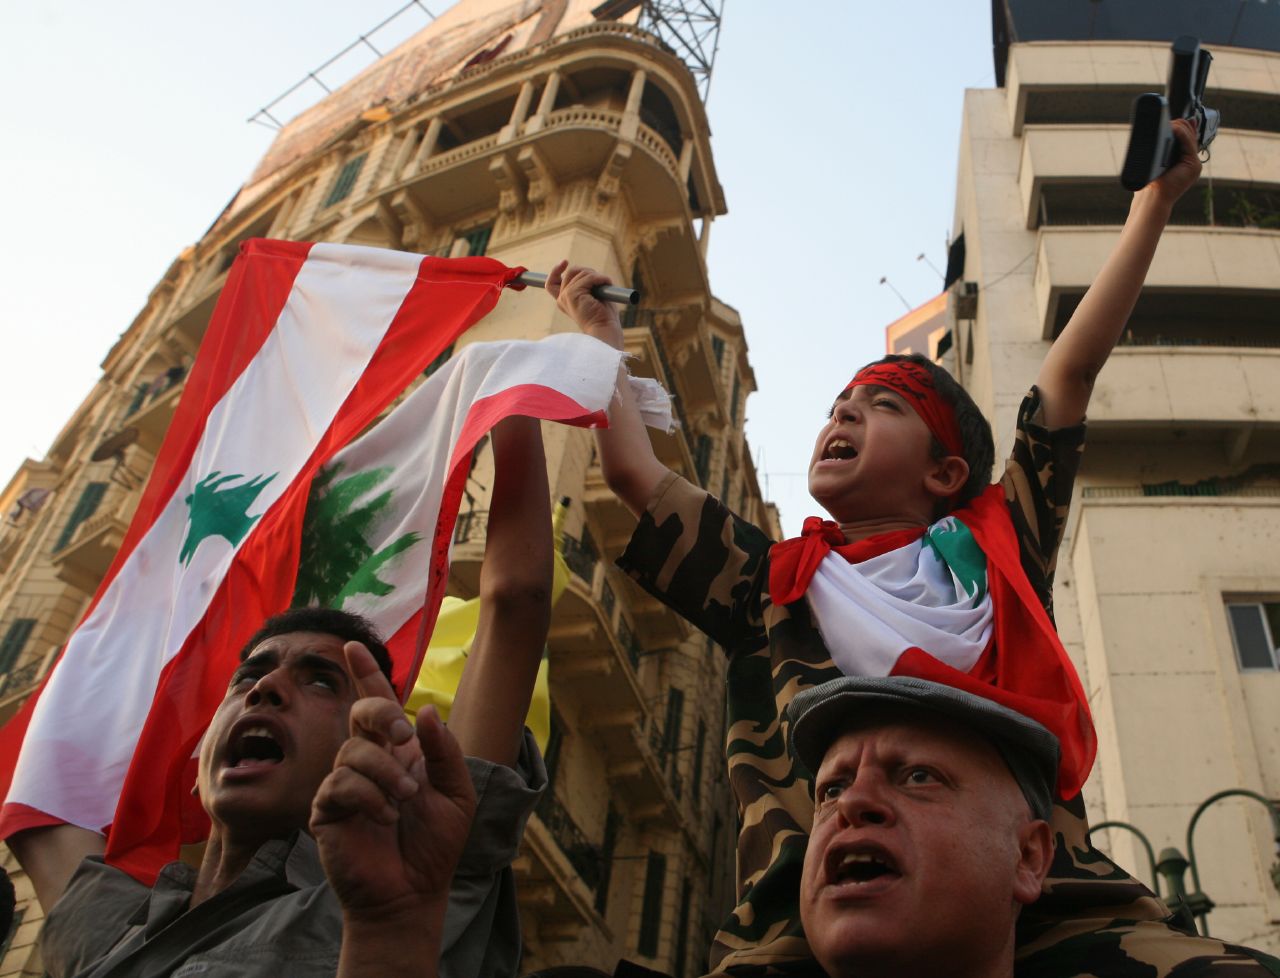 Pro-Lebanese resistance protesters were of all ages (Photo by Amr Abdallah, 26 July 2006)